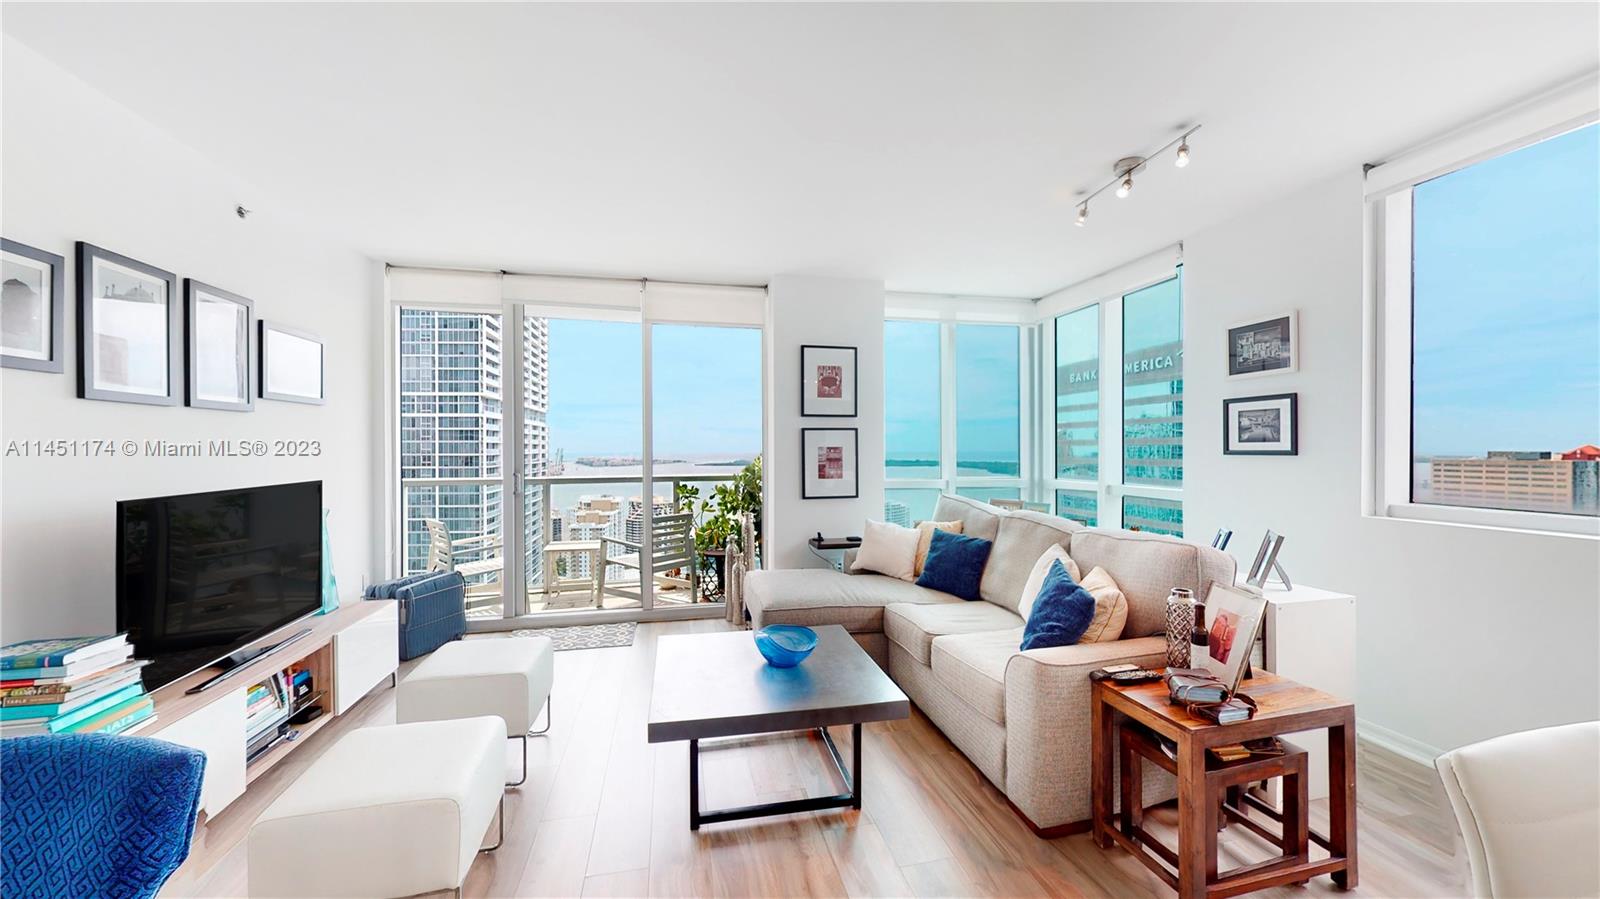 Enjoy the best of what Brickell has to offer – stunning water and city views from the 40th floor of this beautiful, move-in ready 2 bedroom/2 bath corner unit, most desirable floor plan in the building. Updated flooring, new cooktop/oven. Easy access to the heated rooftop pool from the unit. Building offers variety of great amenities, 24/7 security on site, valet parking for visitors. Short walk to Brickell City Centre, Mary Brickell Village, and Downtown. 20 min drive by a car to the airport, Design District, Arts & Entertainment District, Wynwood and Miami Beach. Make your Miami living dream come true! 
Matterport and video of the unit are available.